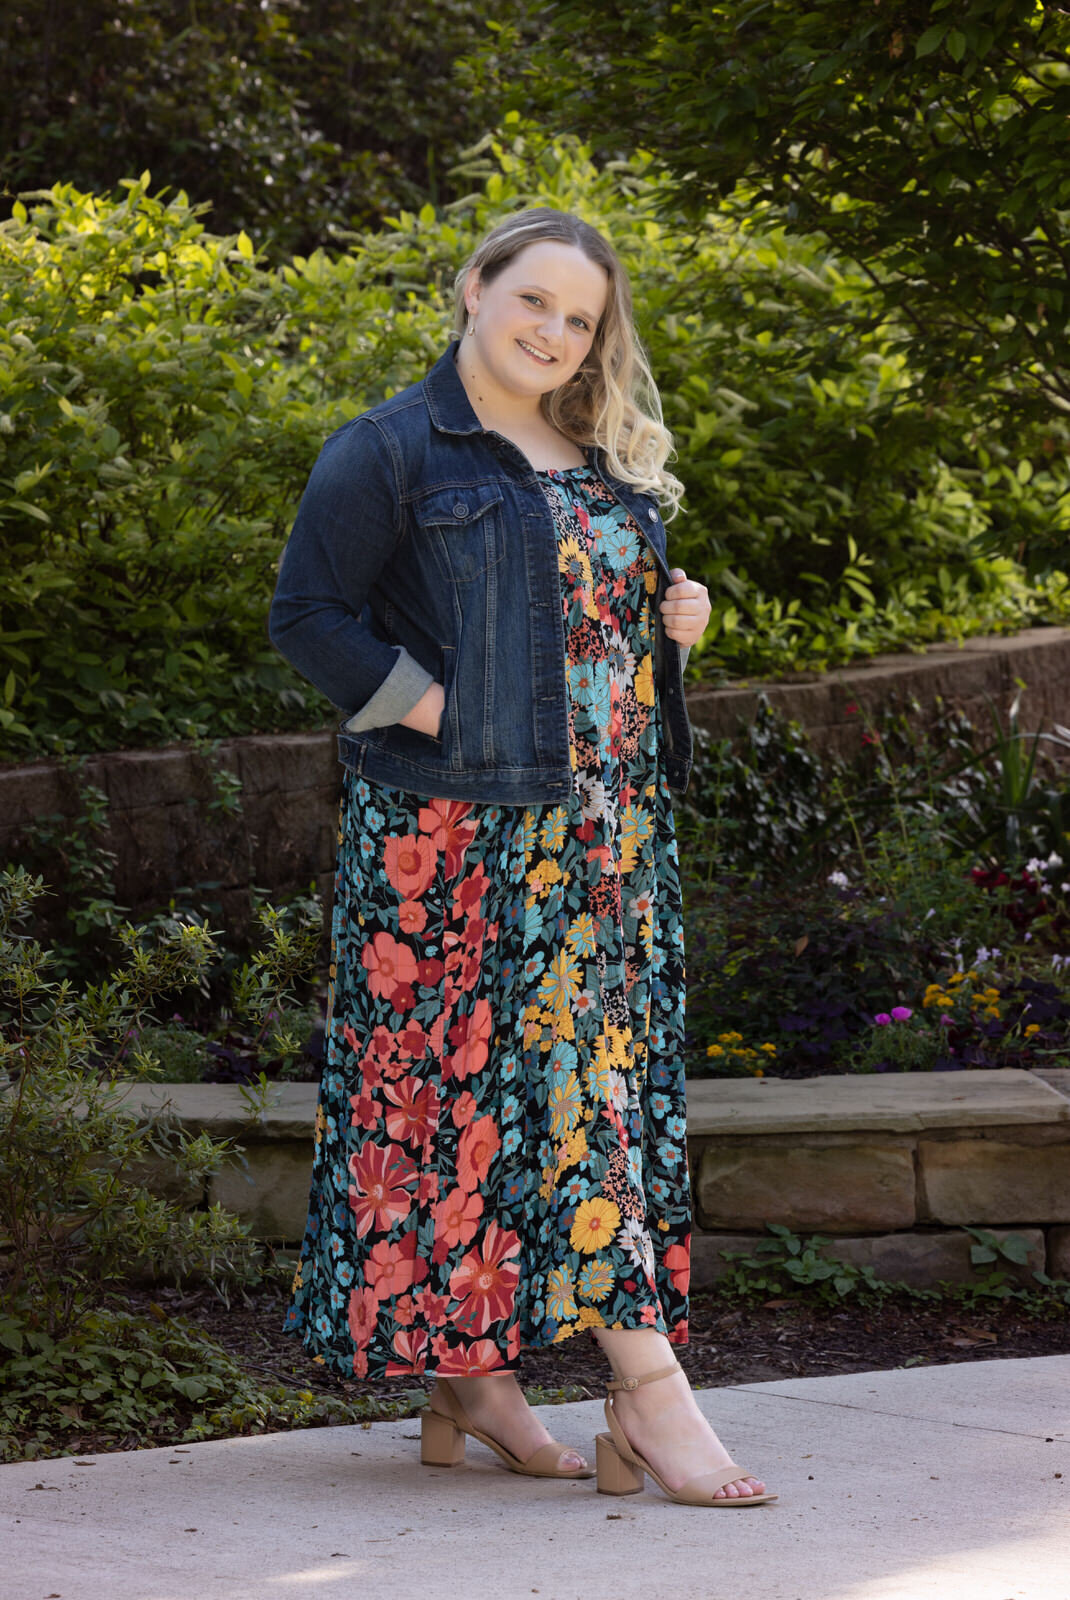 senior-girl-in-colorful-dress-and-jeanjacket-posing-at-grapevine-botanical-gardens